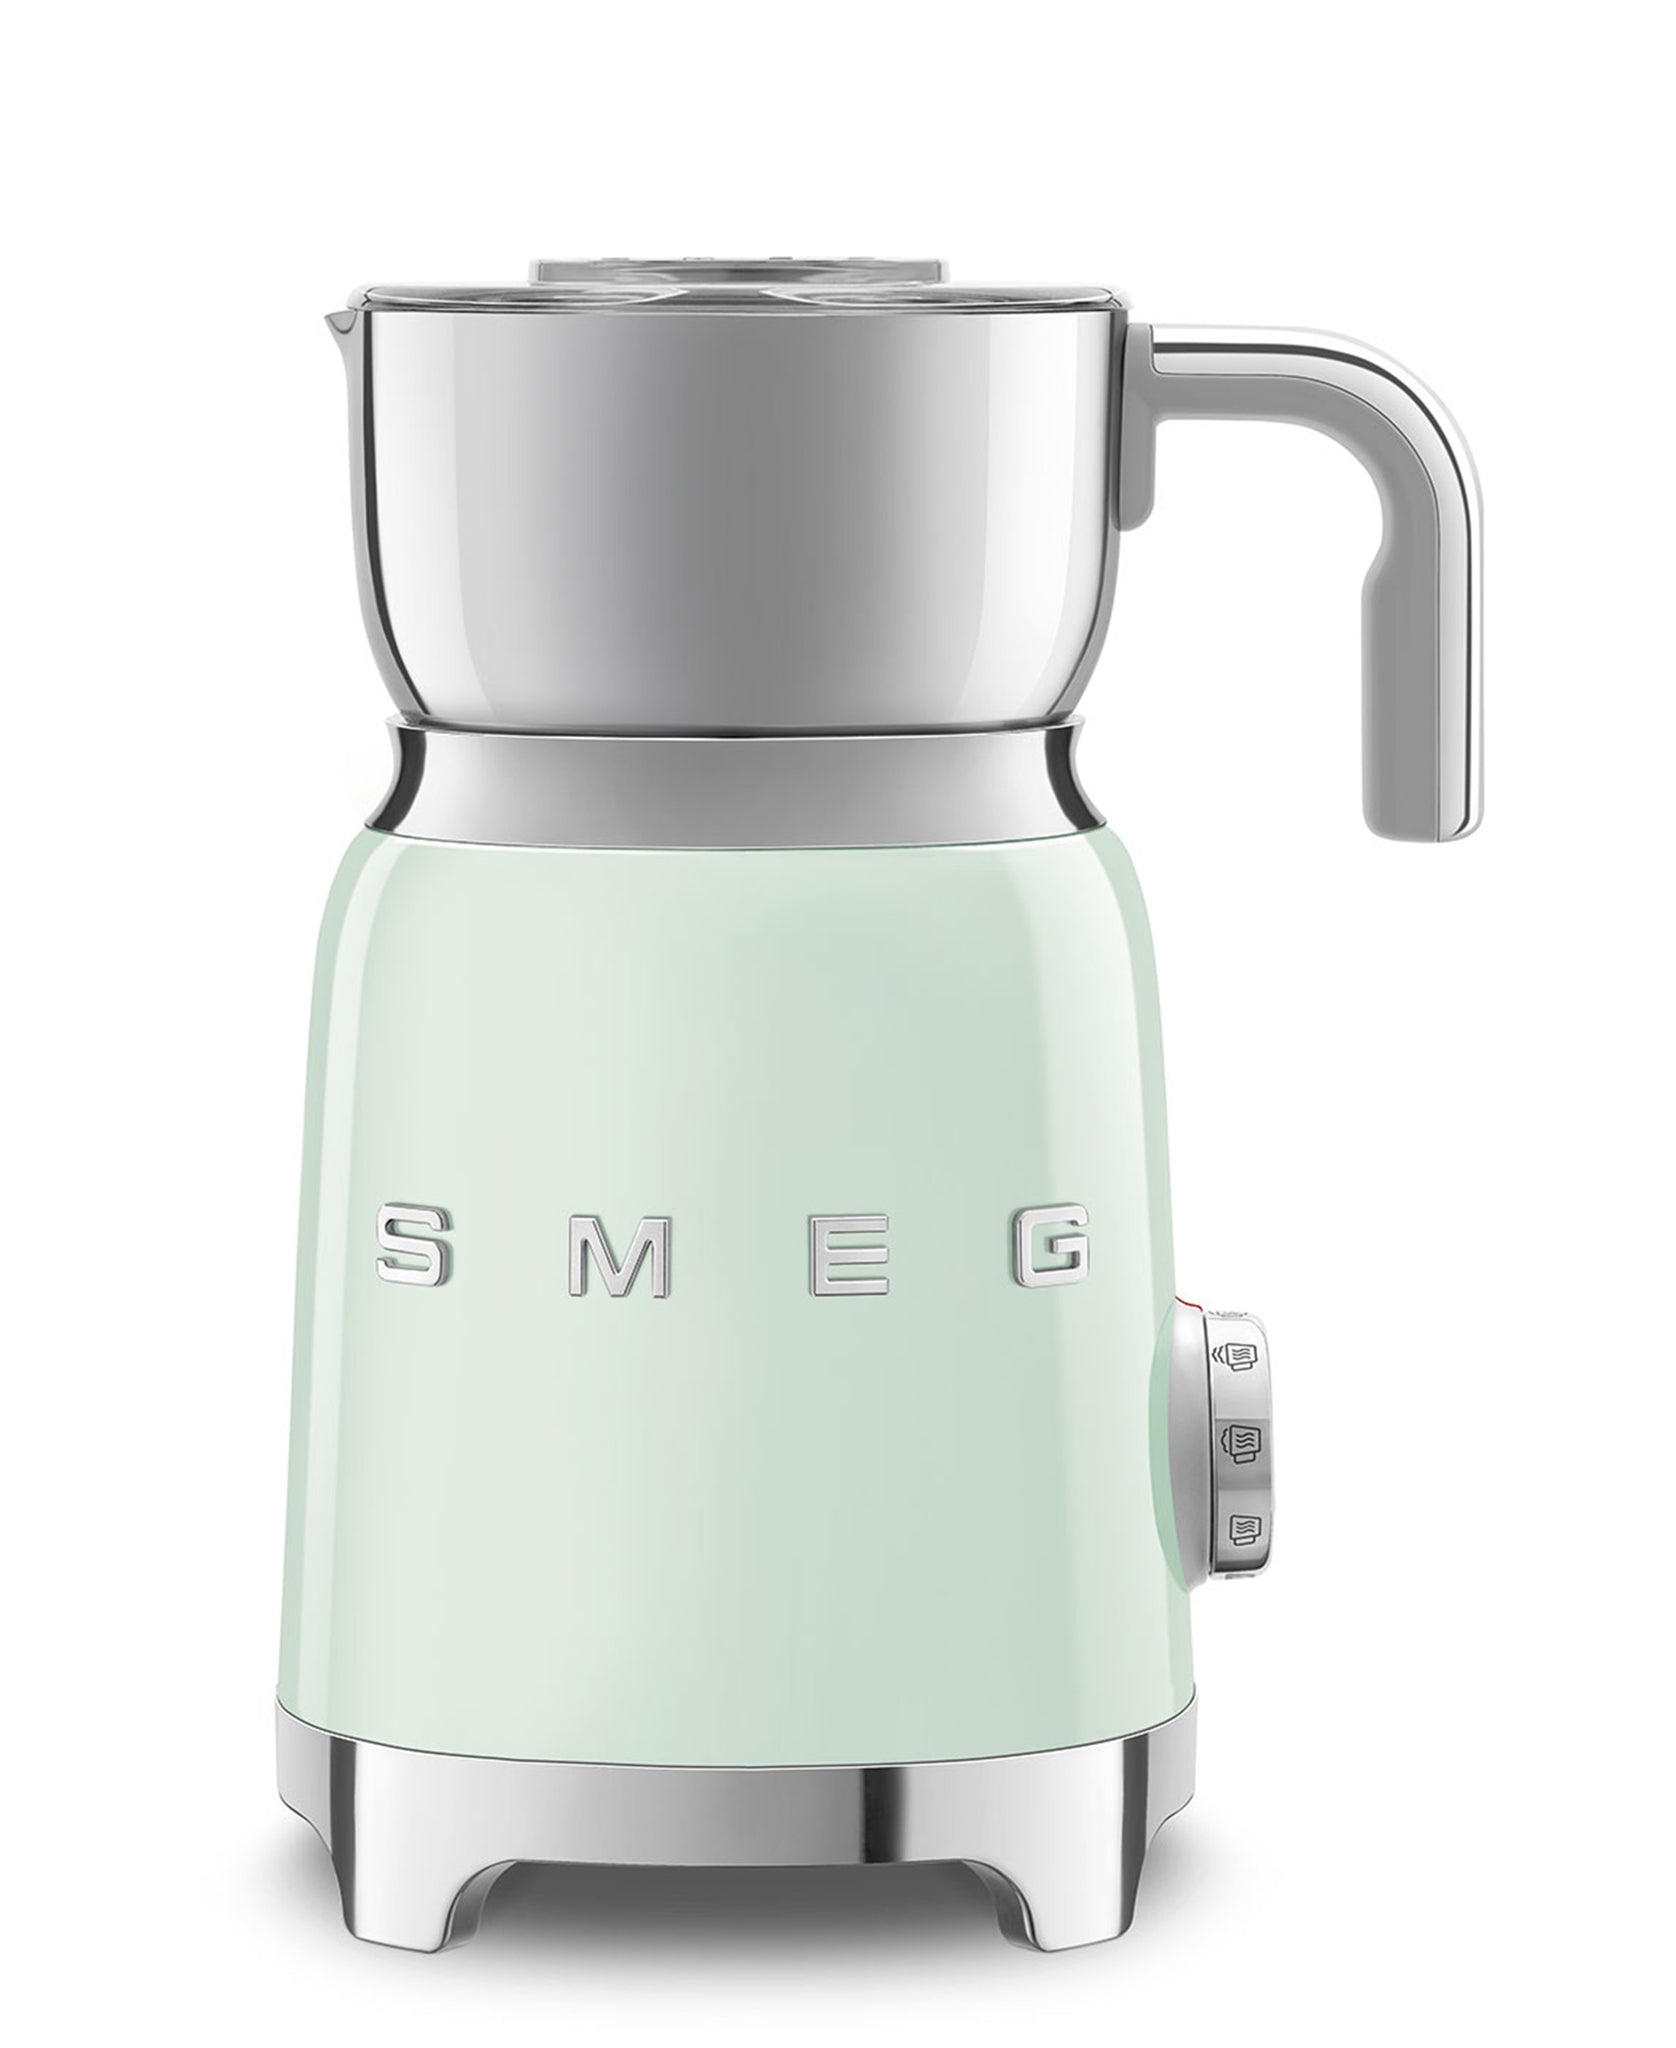 Smeg Milk Frother - Green